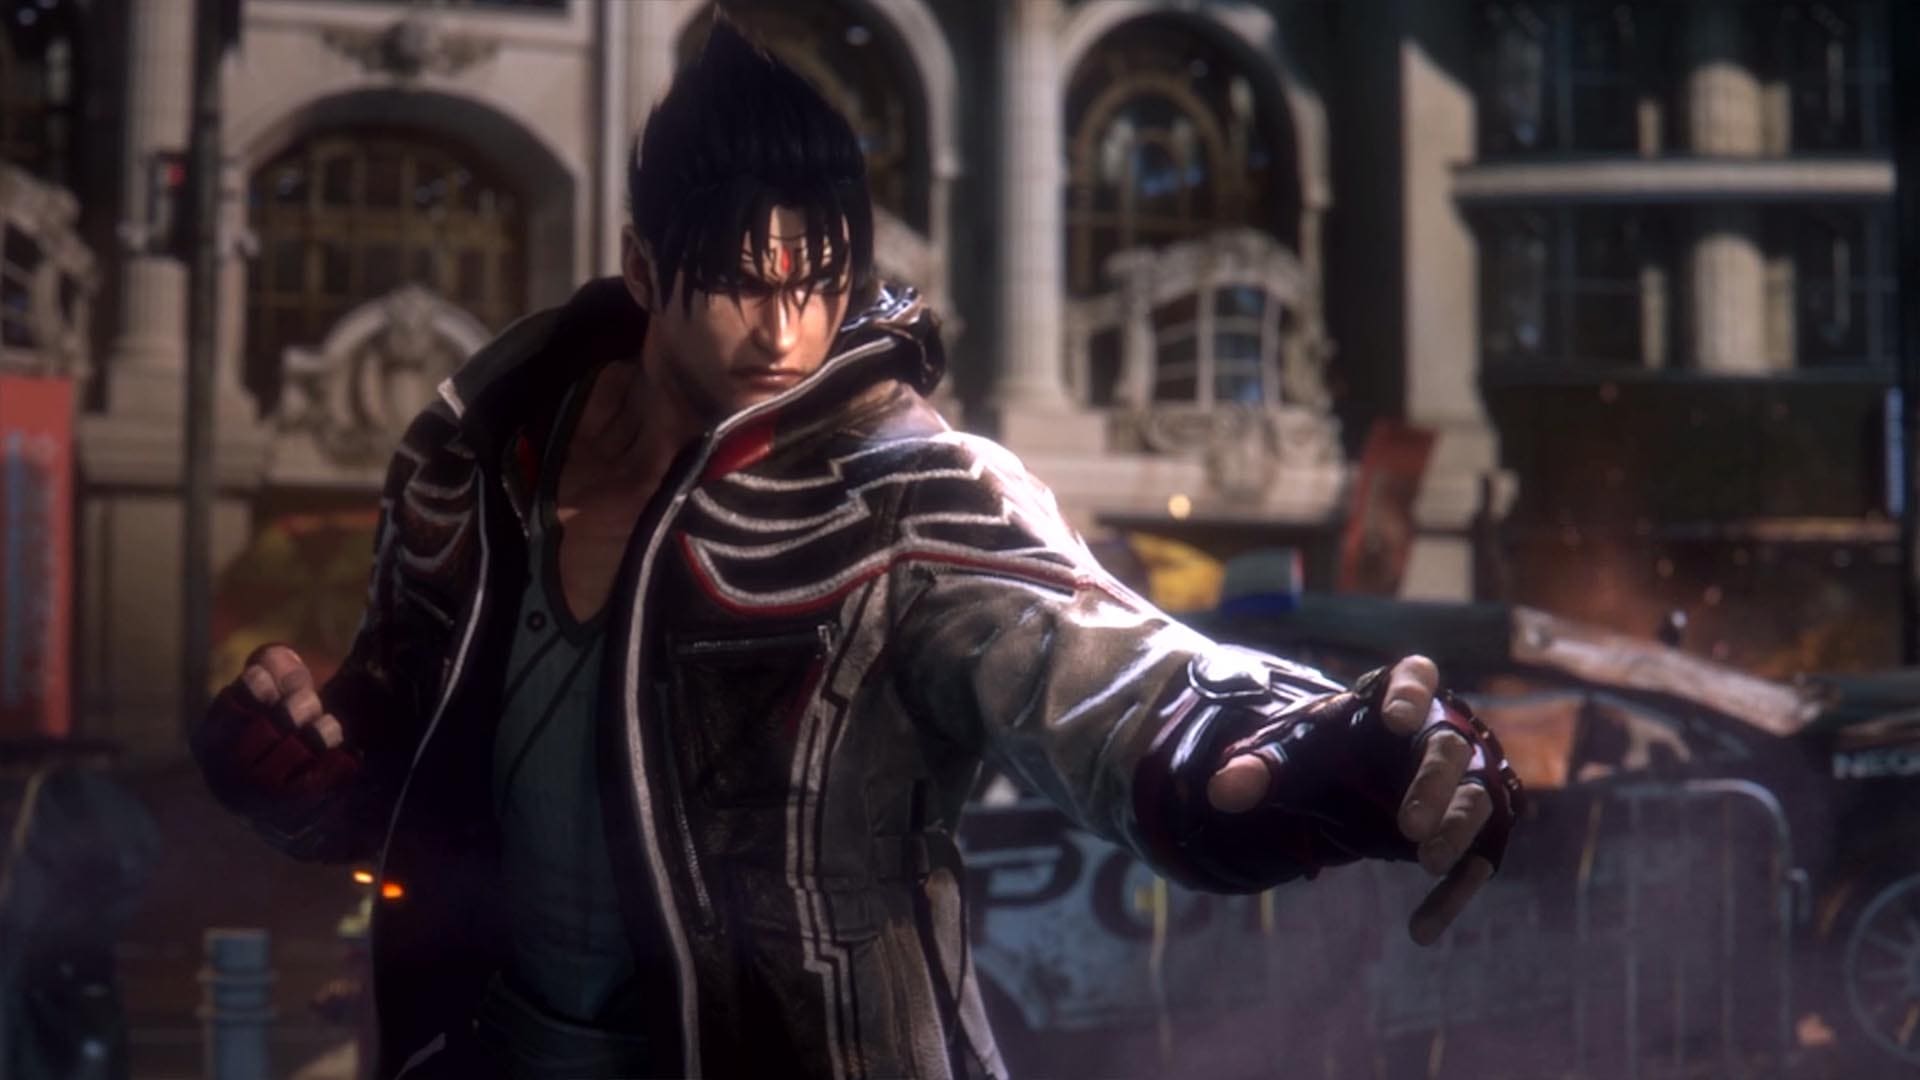   Tekken 8 Version 1.02.01 Patch Notes! Check Out Latest Updates